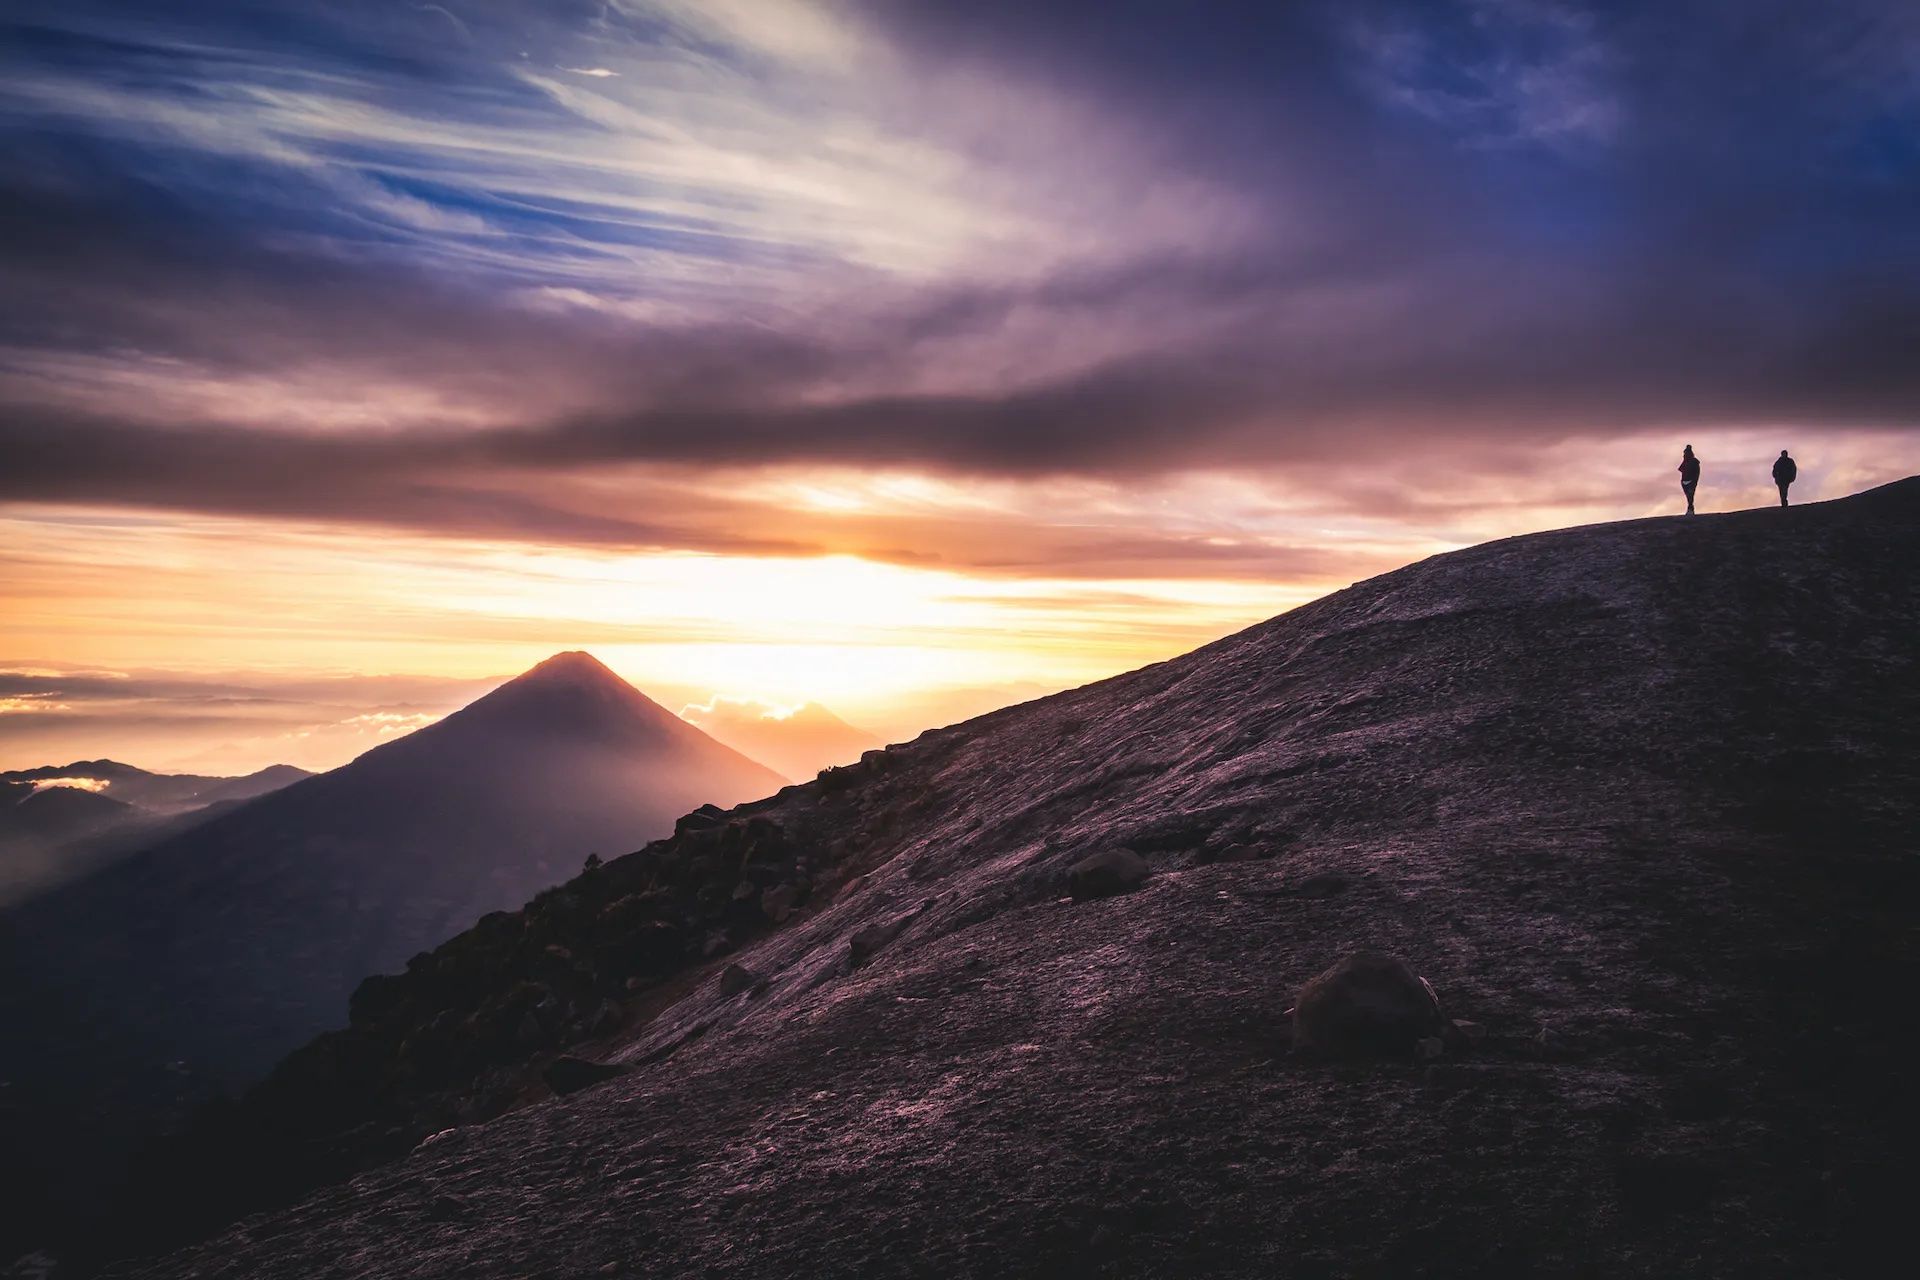 Watching the sun rise from the summit of Acatenango (Fuego Volcano in the background). Photo: iStock